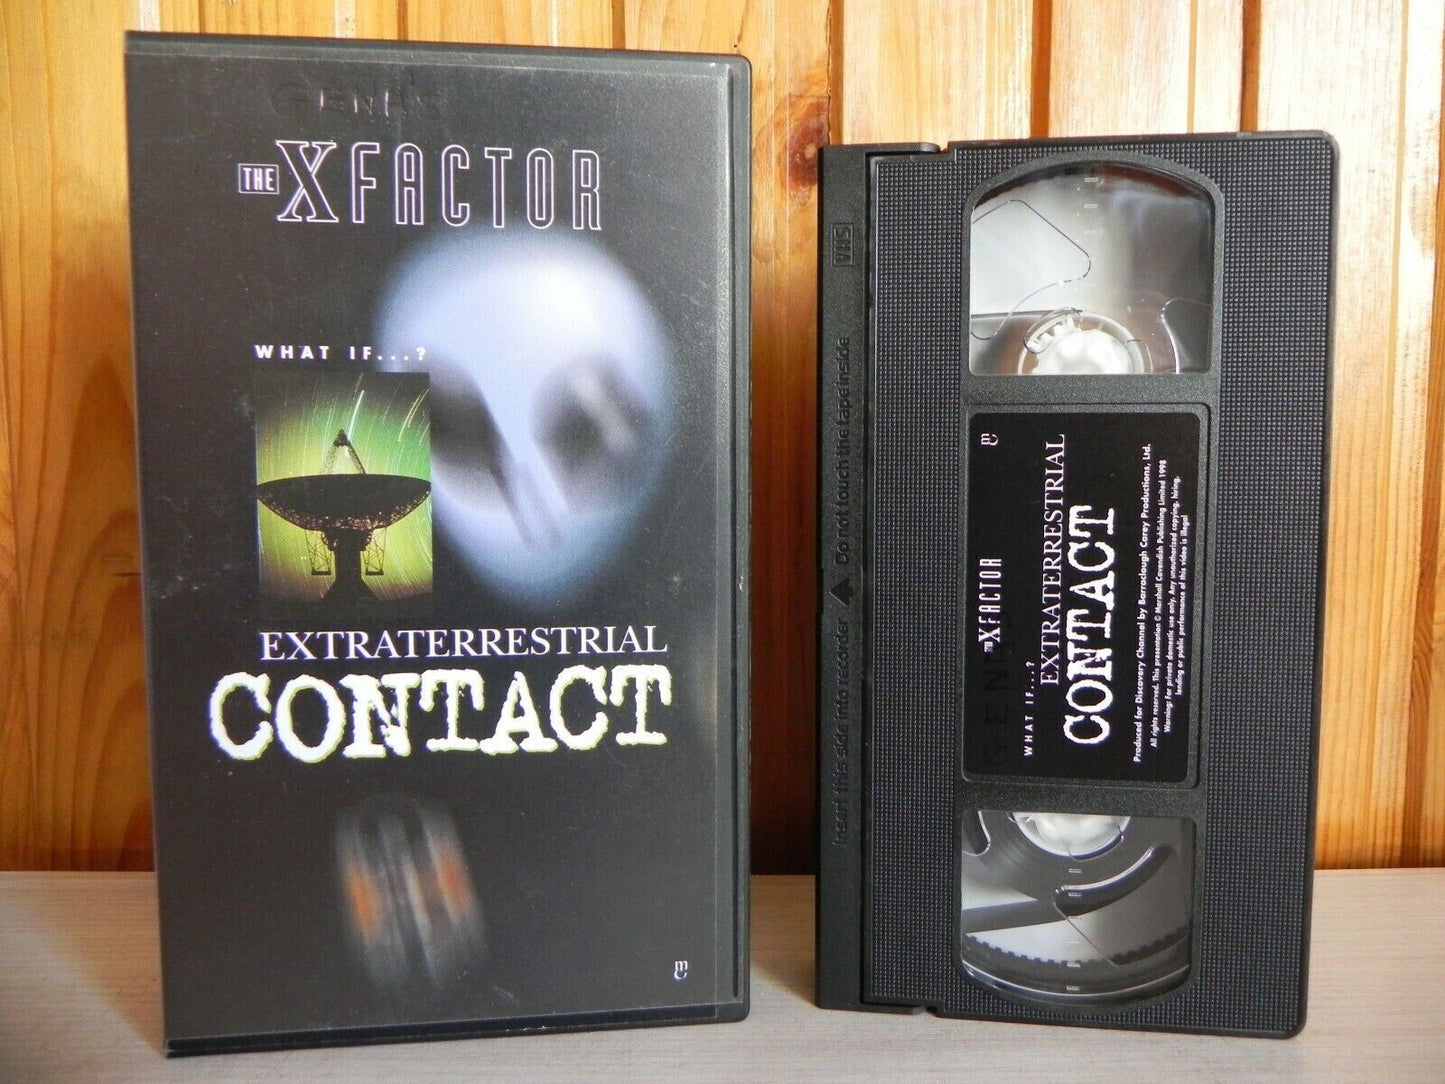 The X Factor - What If...? - Extraterrestrial Contact - Discovery Channel - VHS-